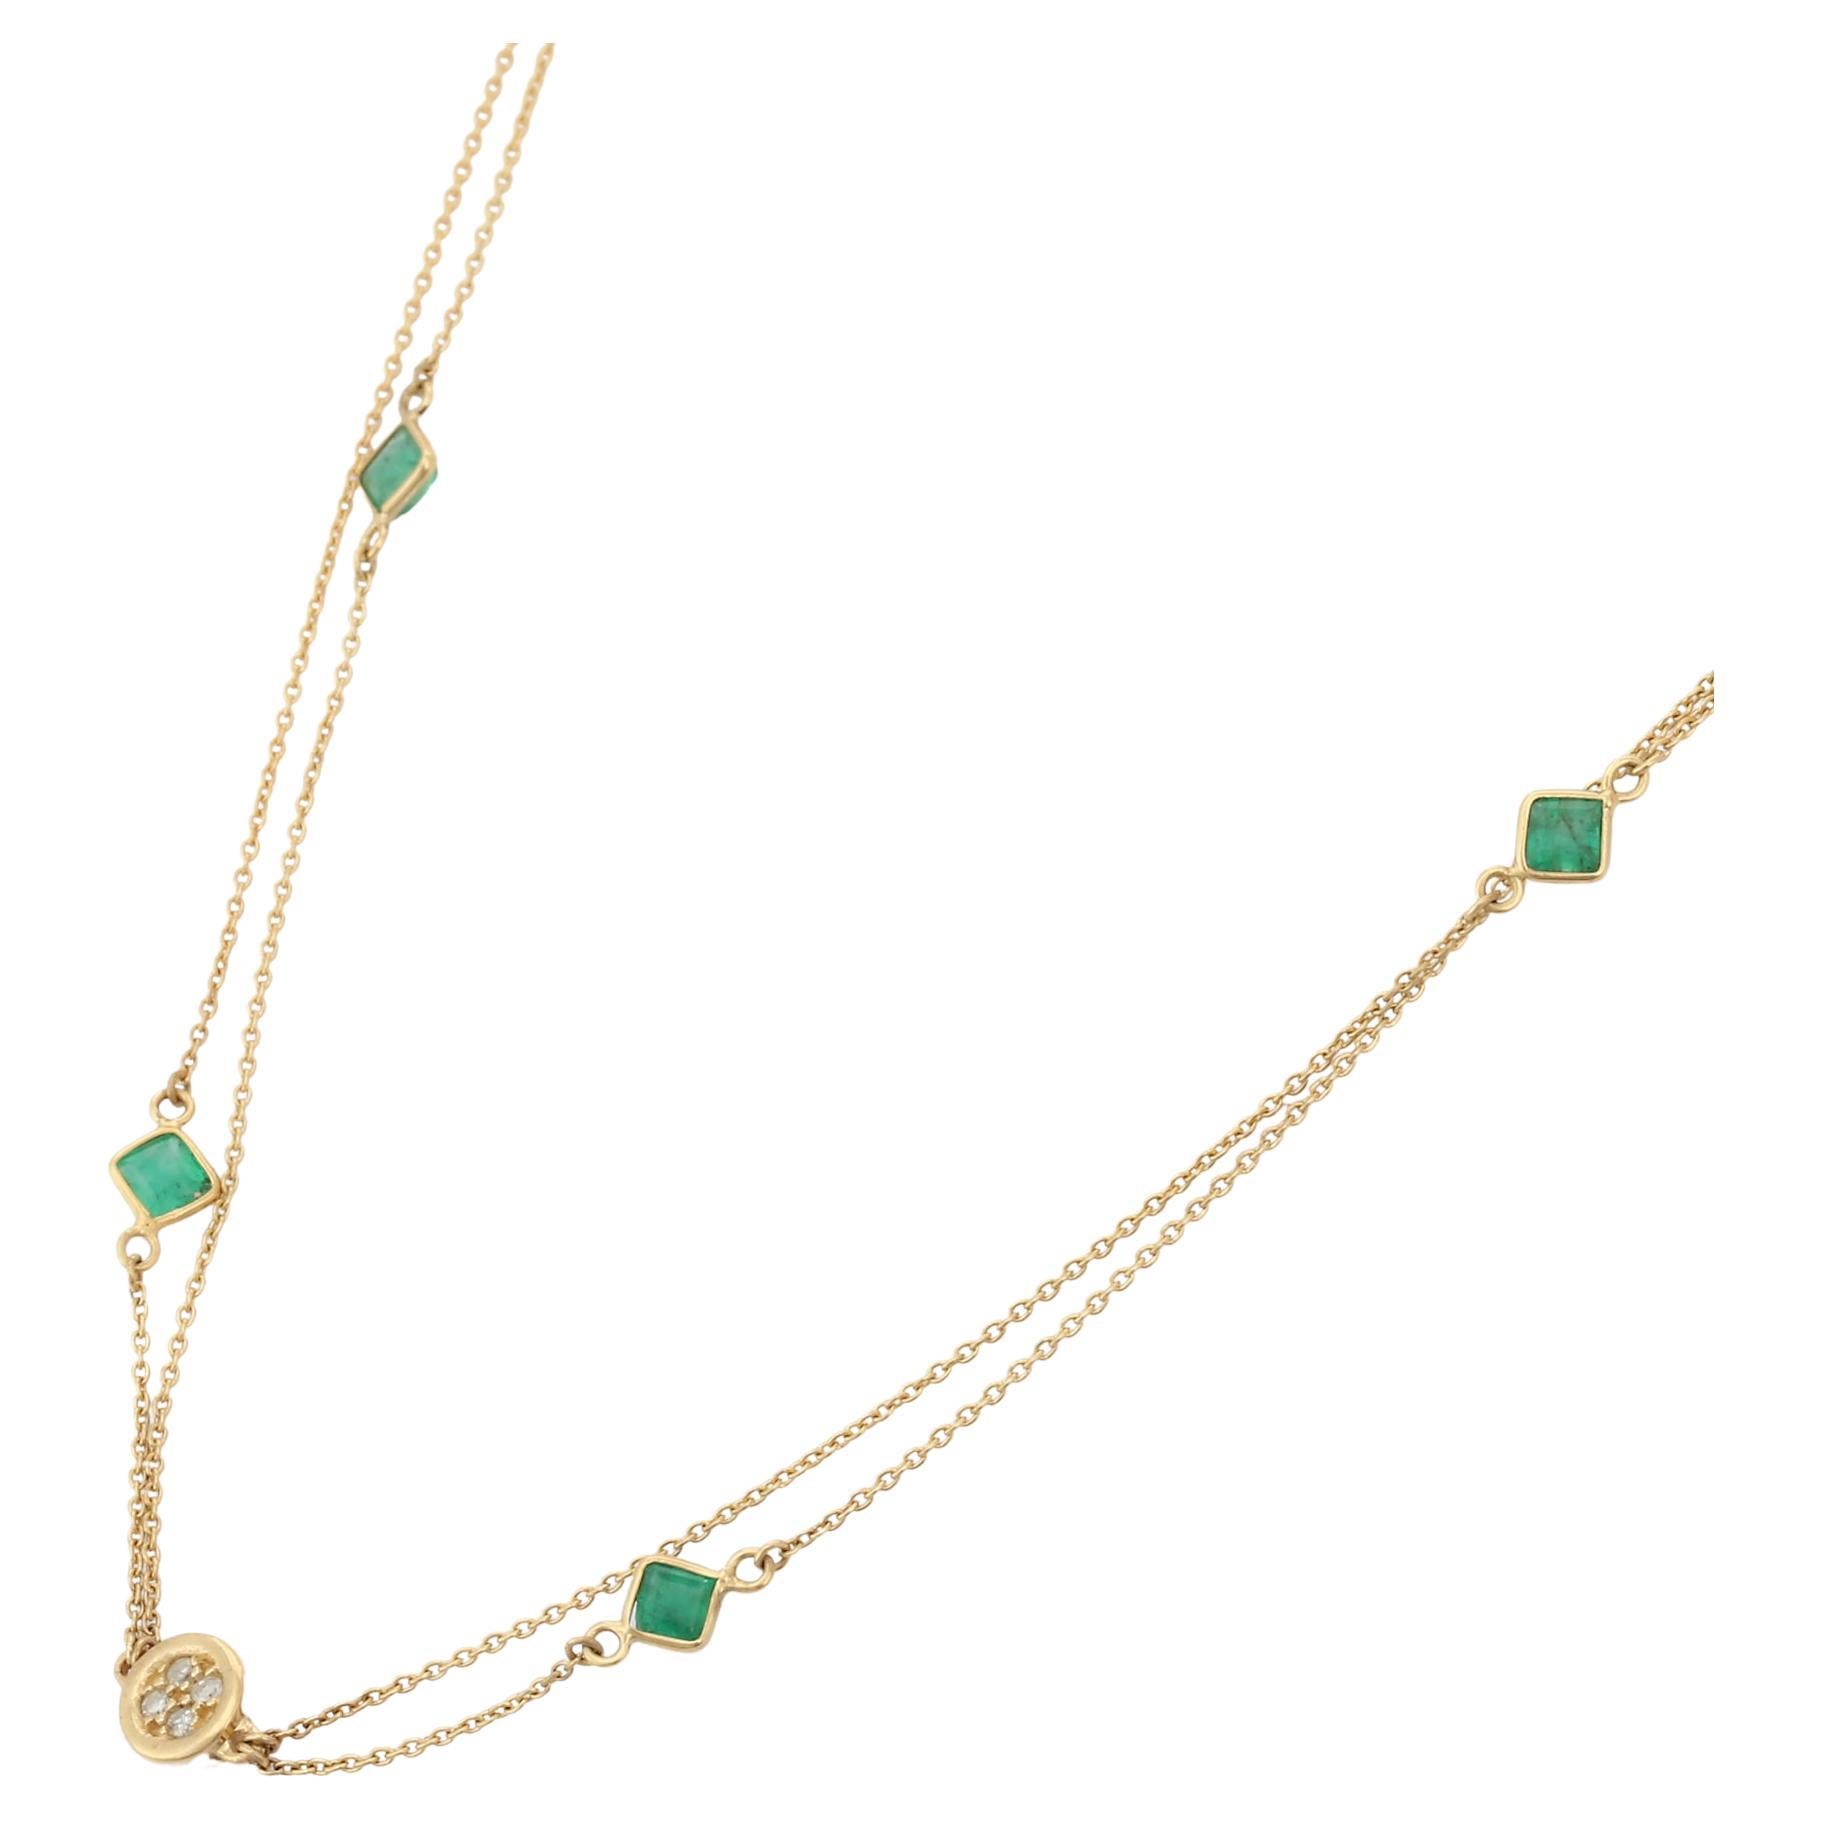 3.75 Carat Emerald Diamond Multi Strained Chain Necklace in 18K Yellow Gold